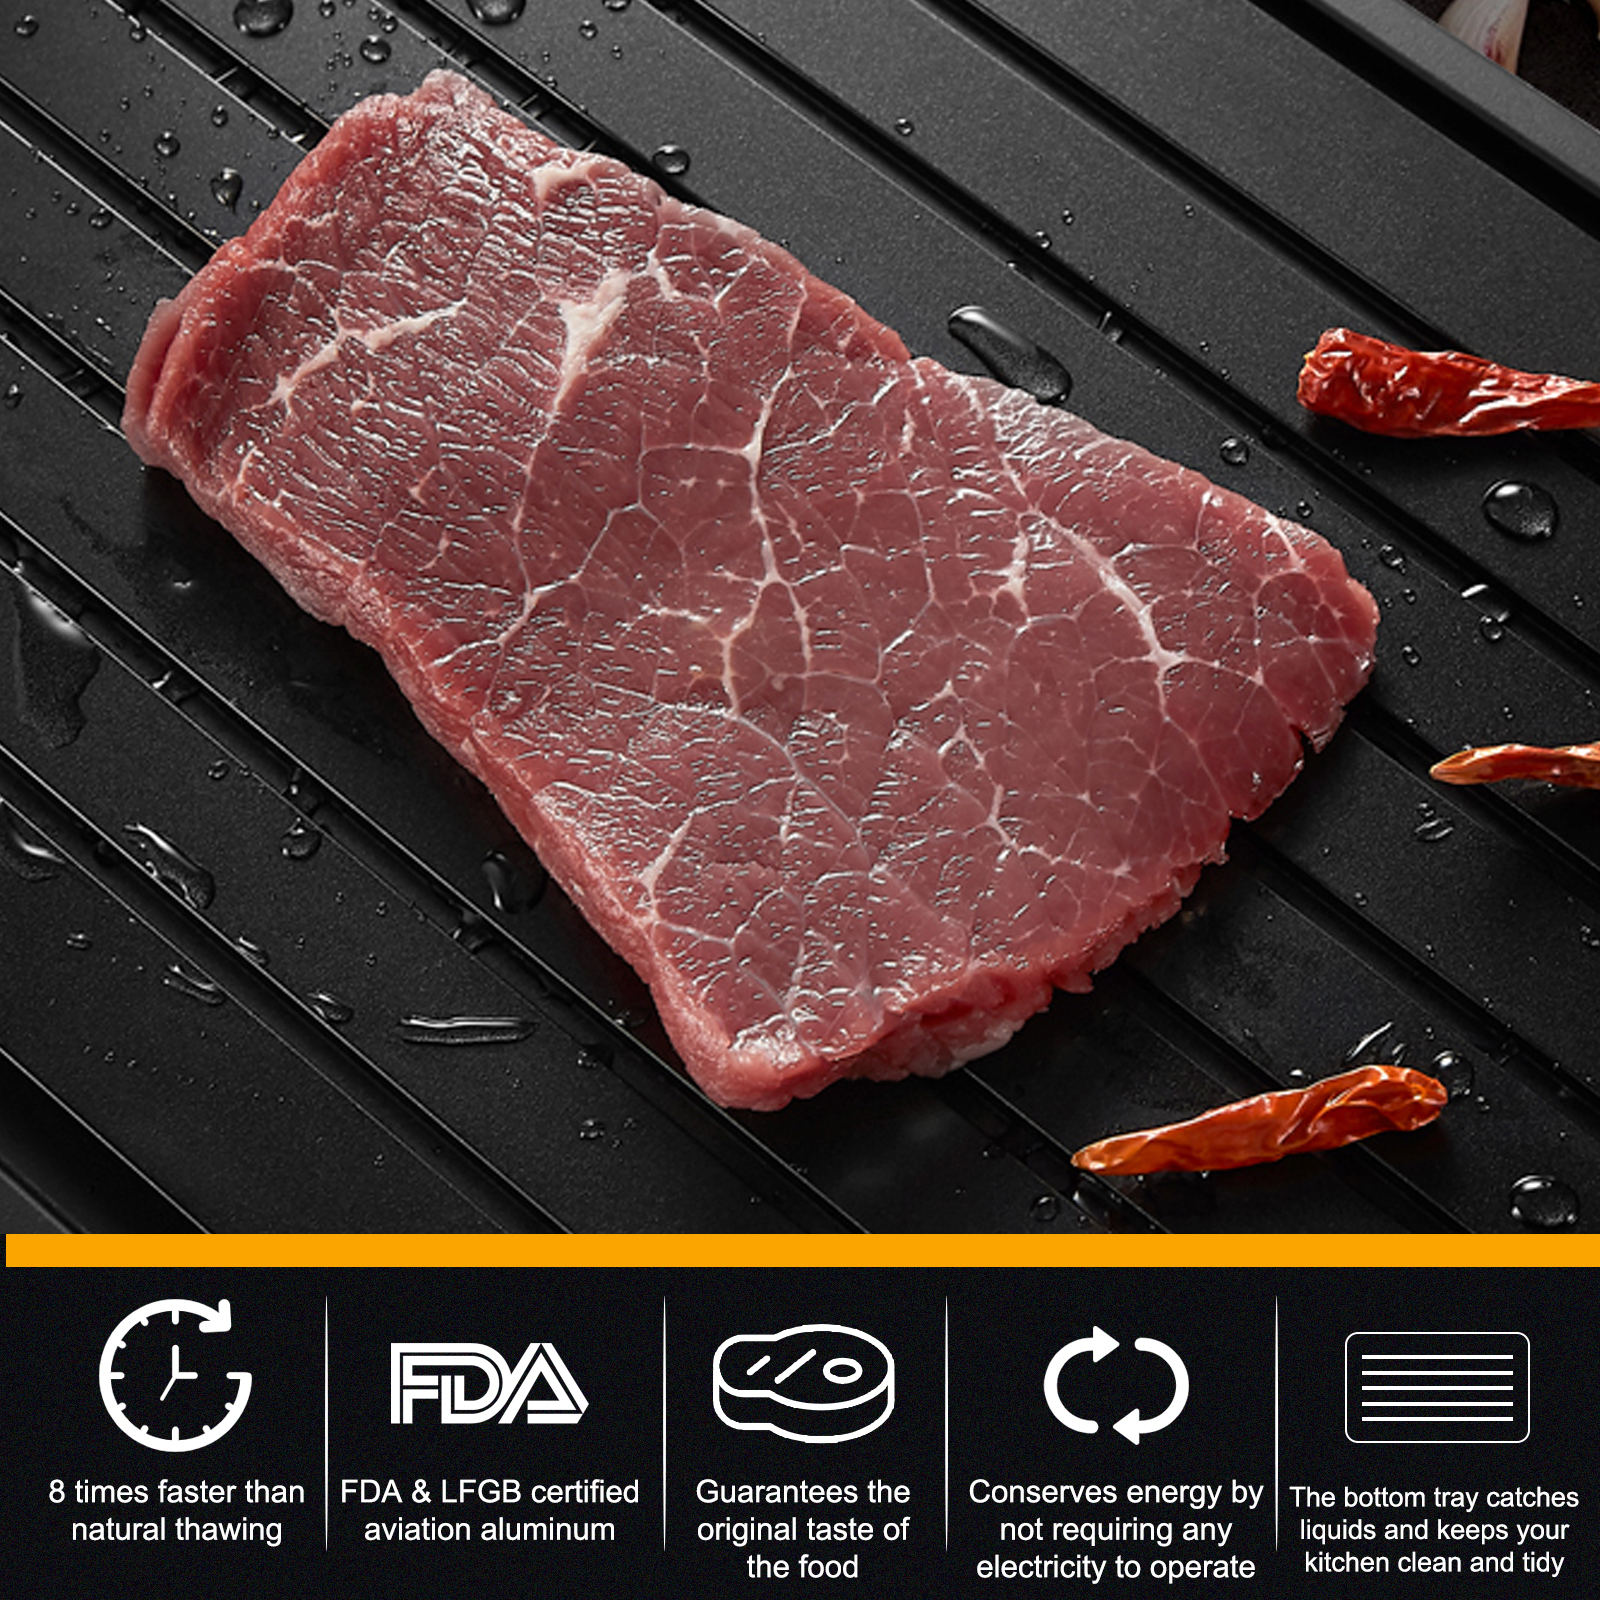 Defrosting-Tray-Thawing-Plate-Frozen-Food-Faster-and-Safer-Way-to-Defrost-Meat-or-Frozen-Food-Plate-1344447-2